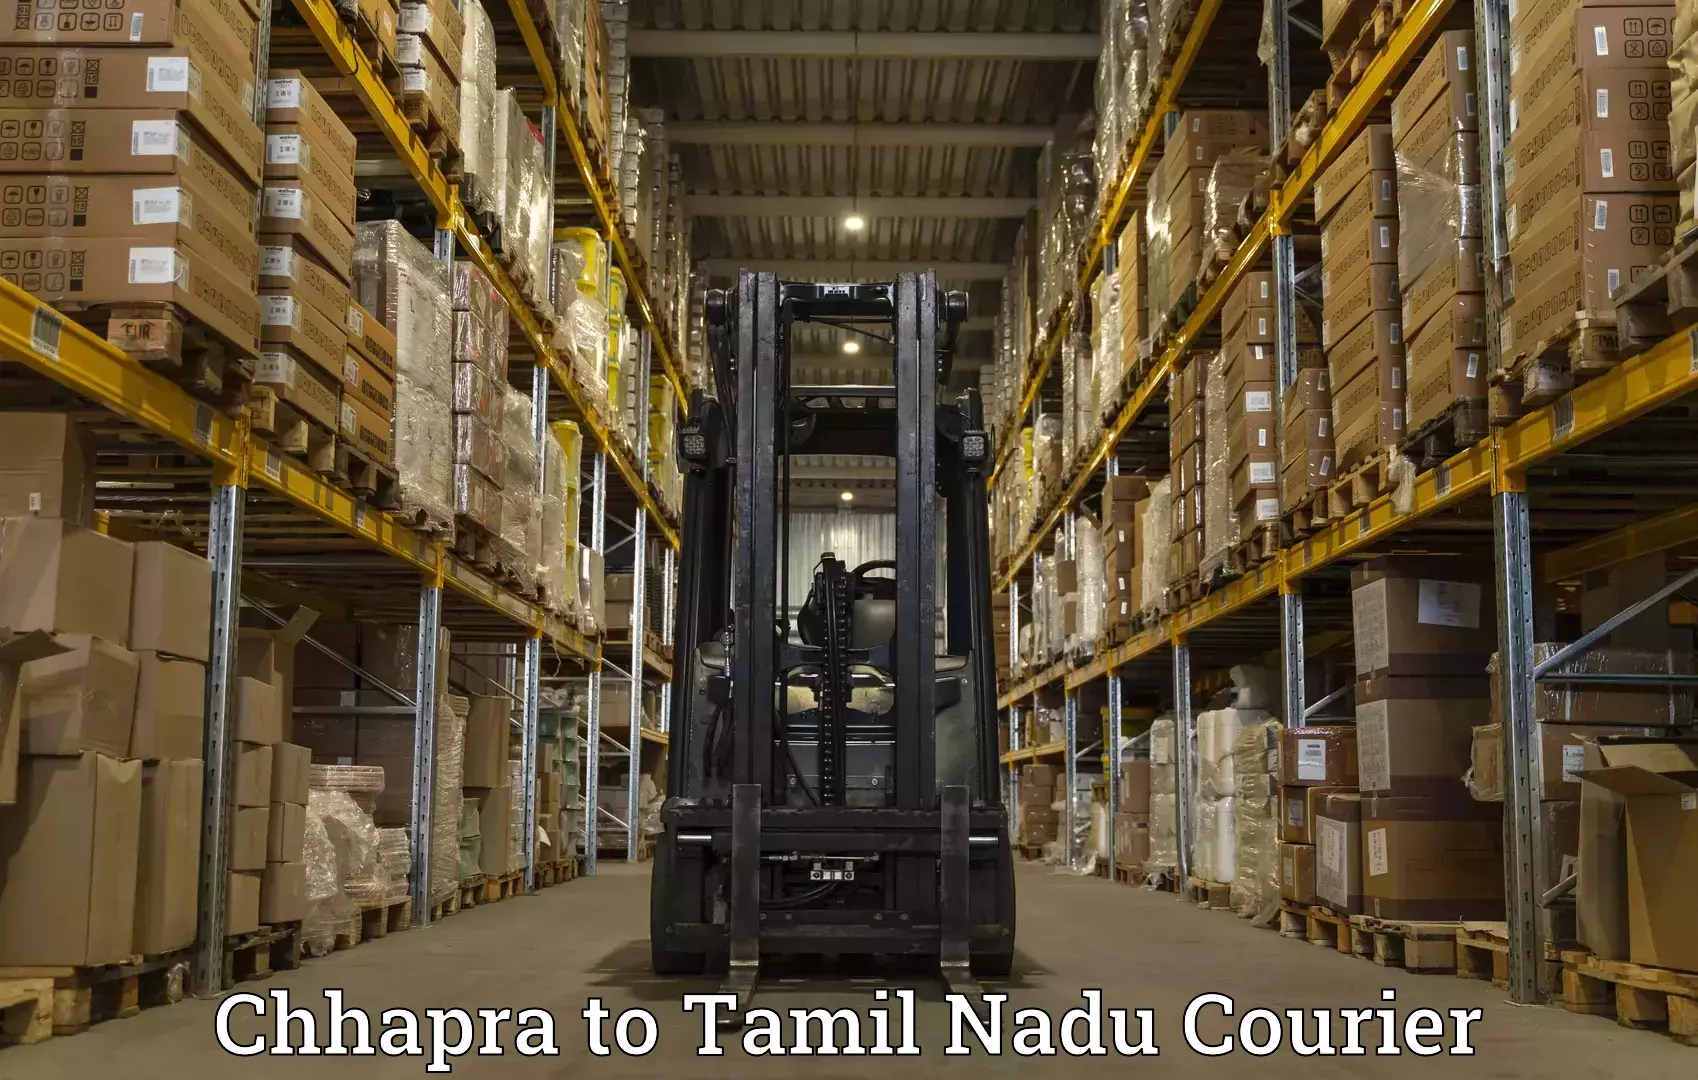 Professional parcel services in Chhapra to Tamil Nadu